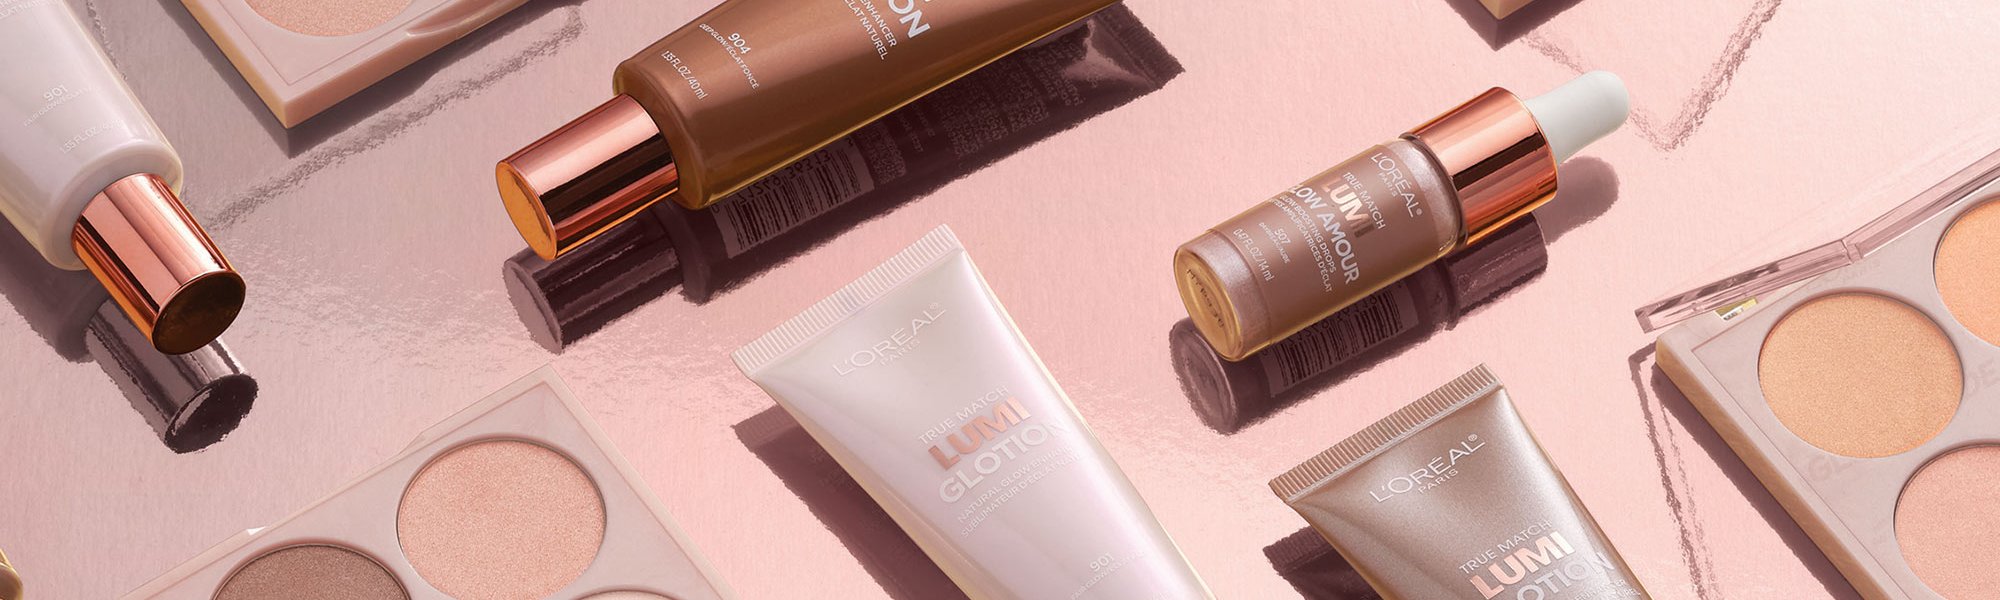 How To Apply Highligter Based On The Glow You Want